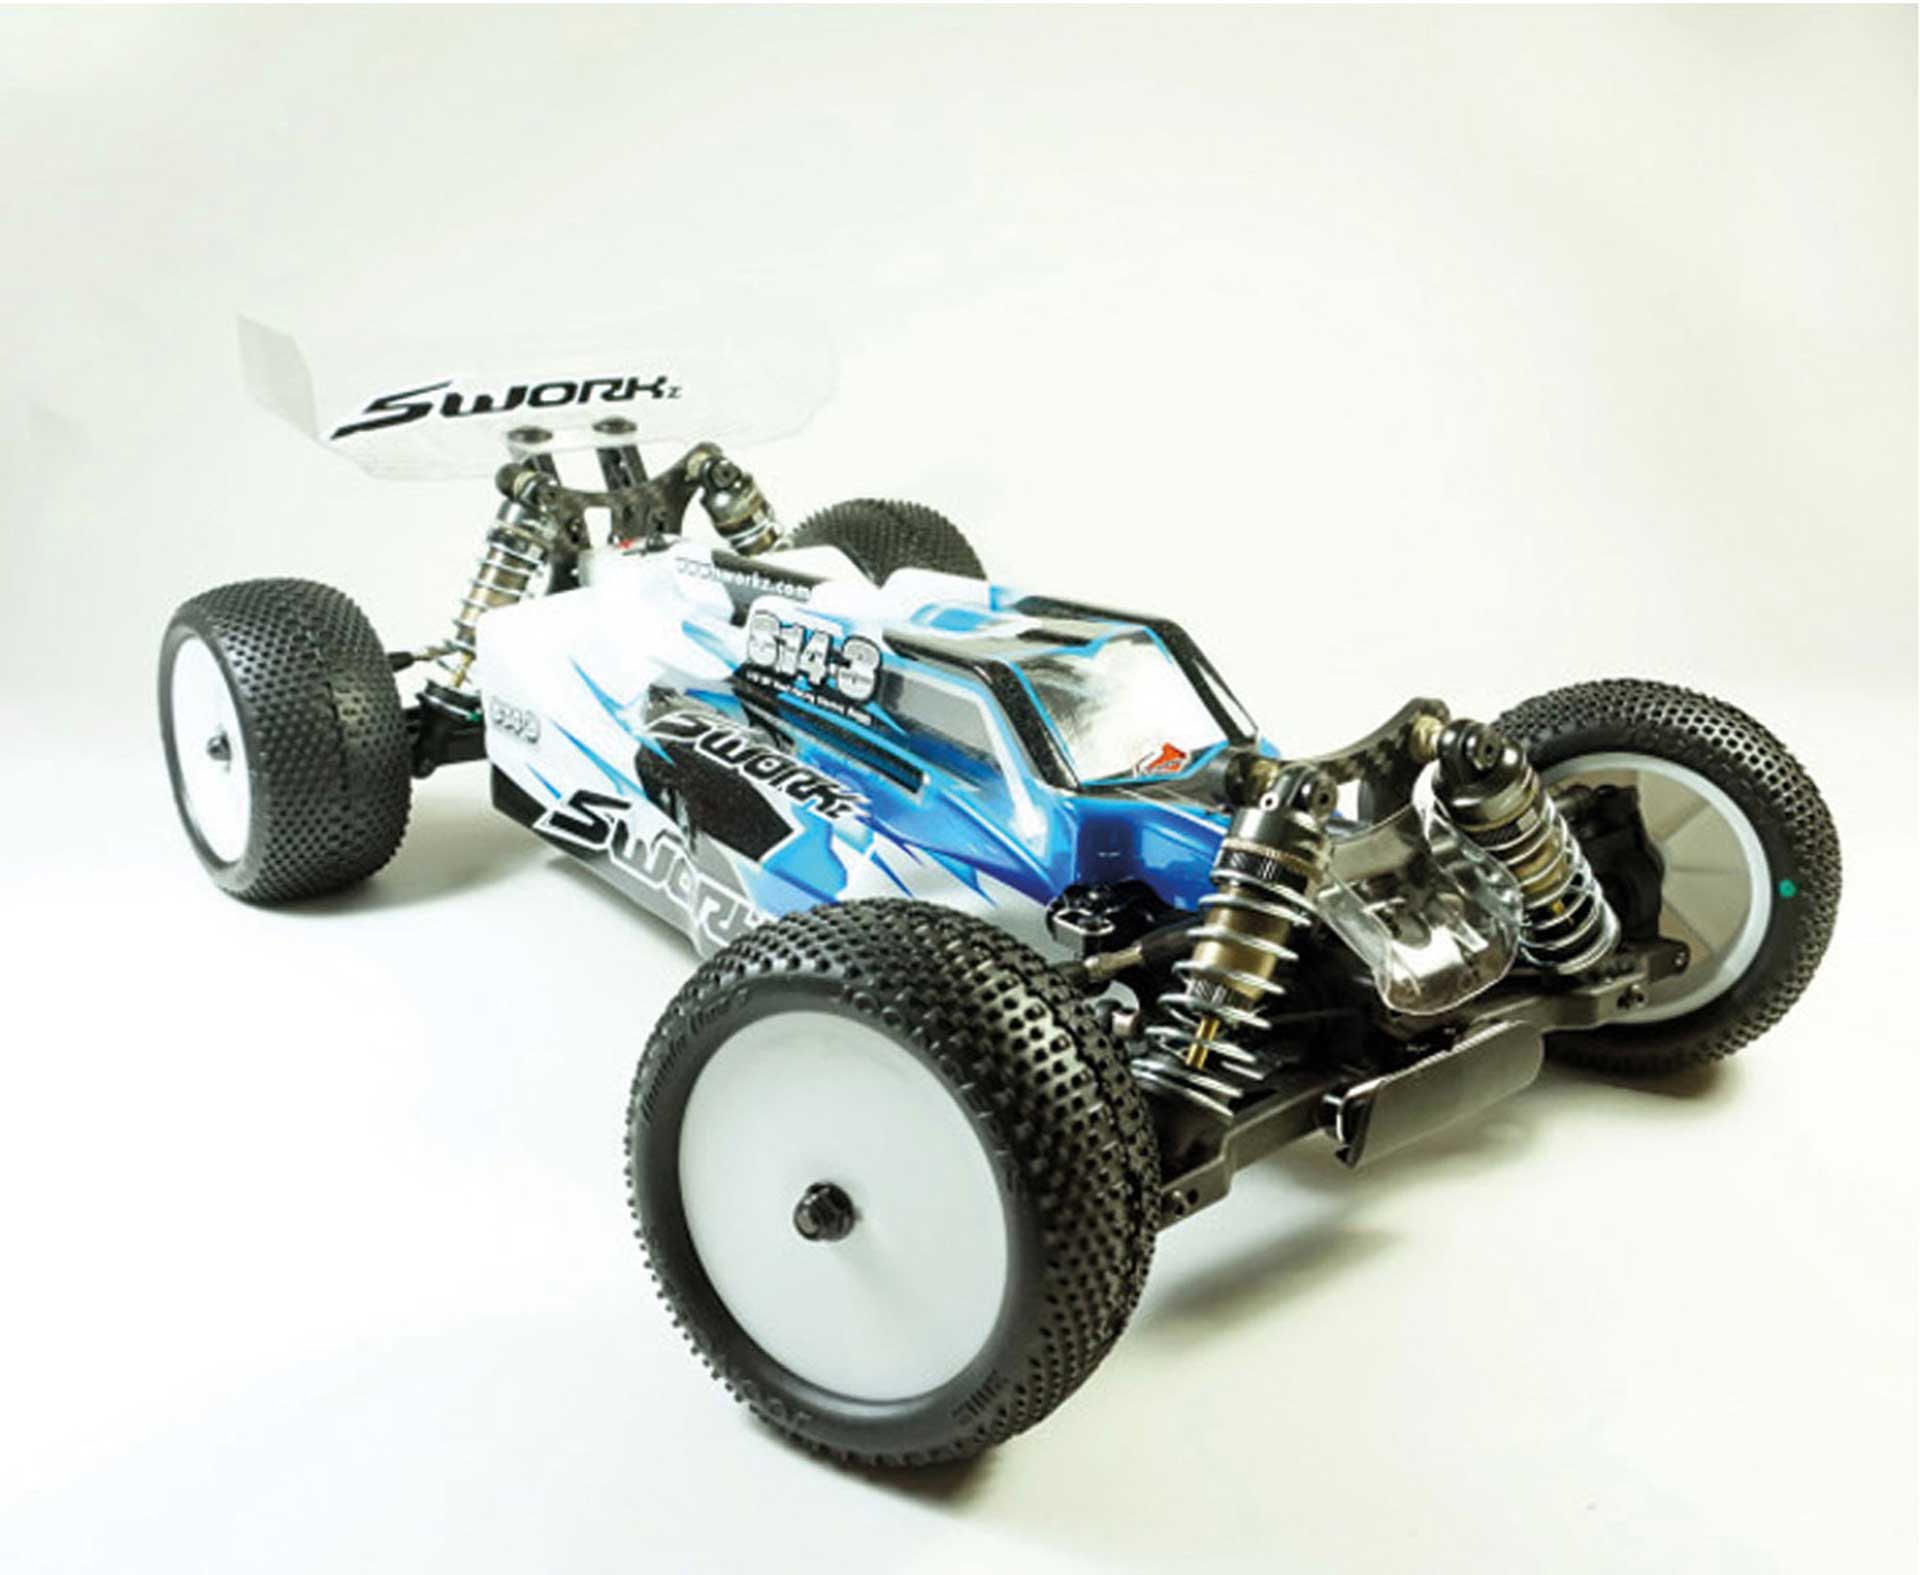 SWORKZ S14-3 "DIRT" 1/10 4WD OFF-ROAD RACING BUGGY PRO KIT EP